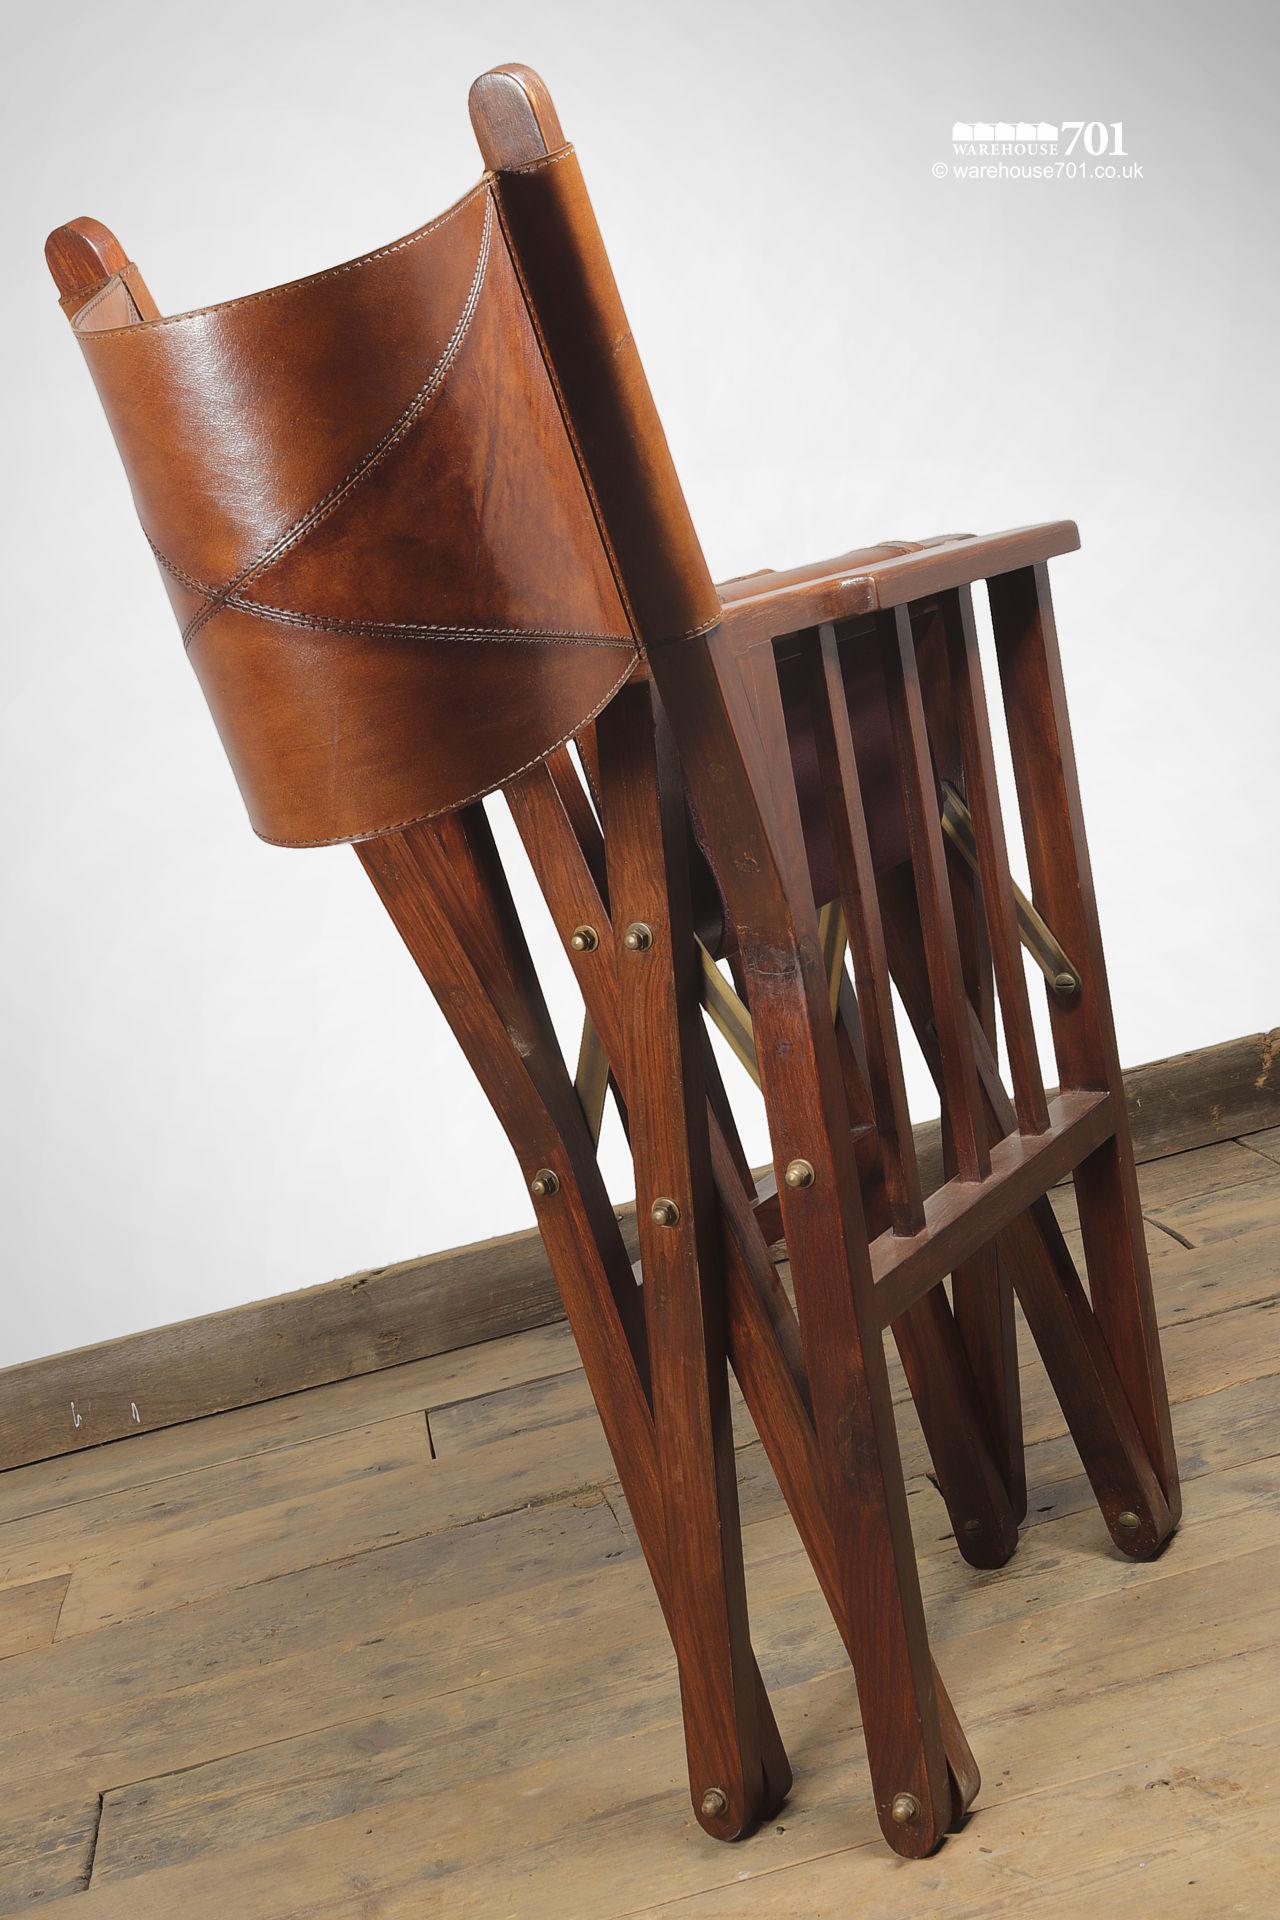 NEW Wood and Stitched Leather Campaign or Directors Chair #7